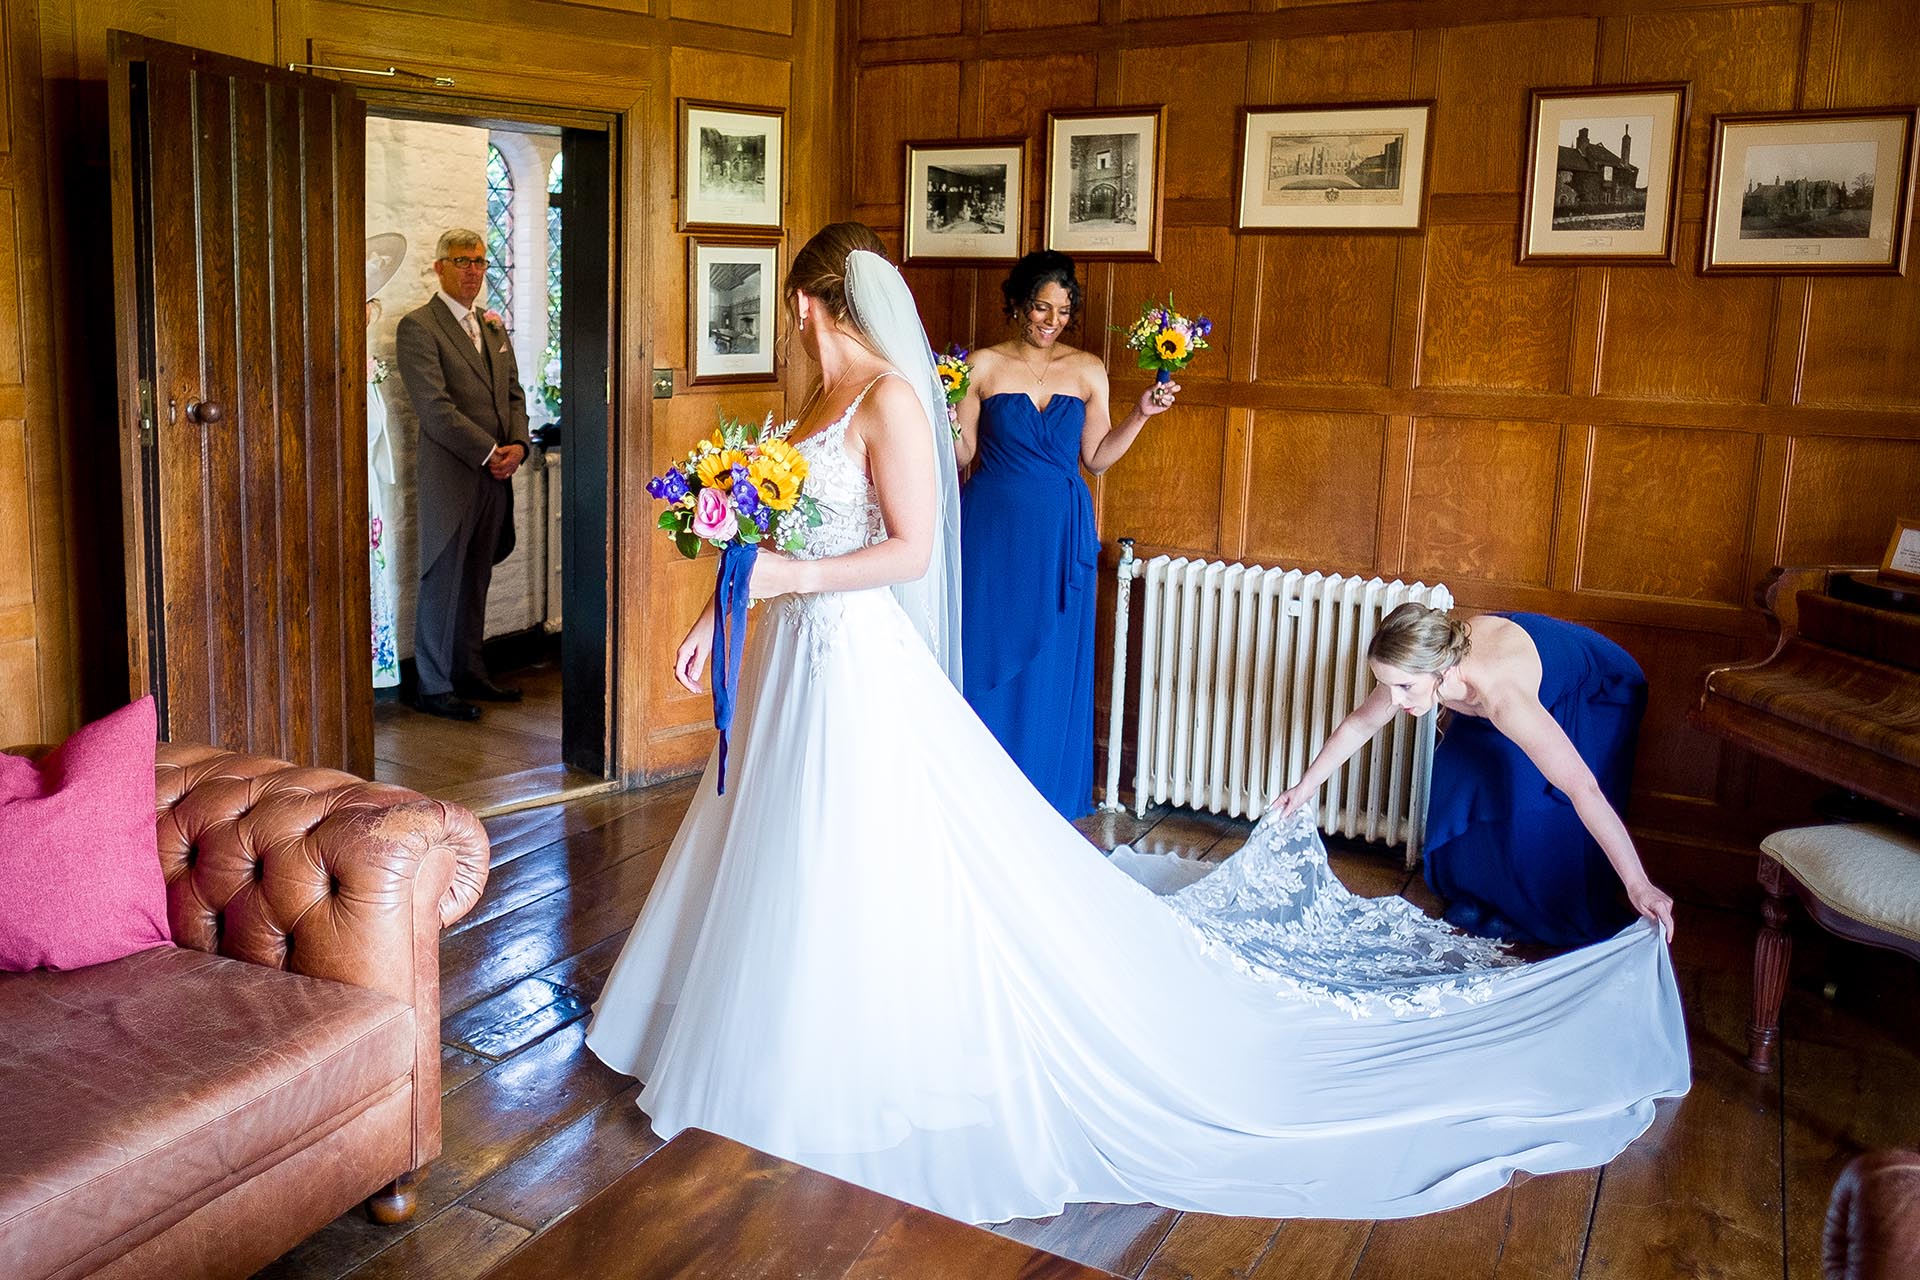 Bride and bridesmaids making final preparations before the wedding ceremony at Leez Priory, Great Leighs, Chelmsford by Essex wedding photographer